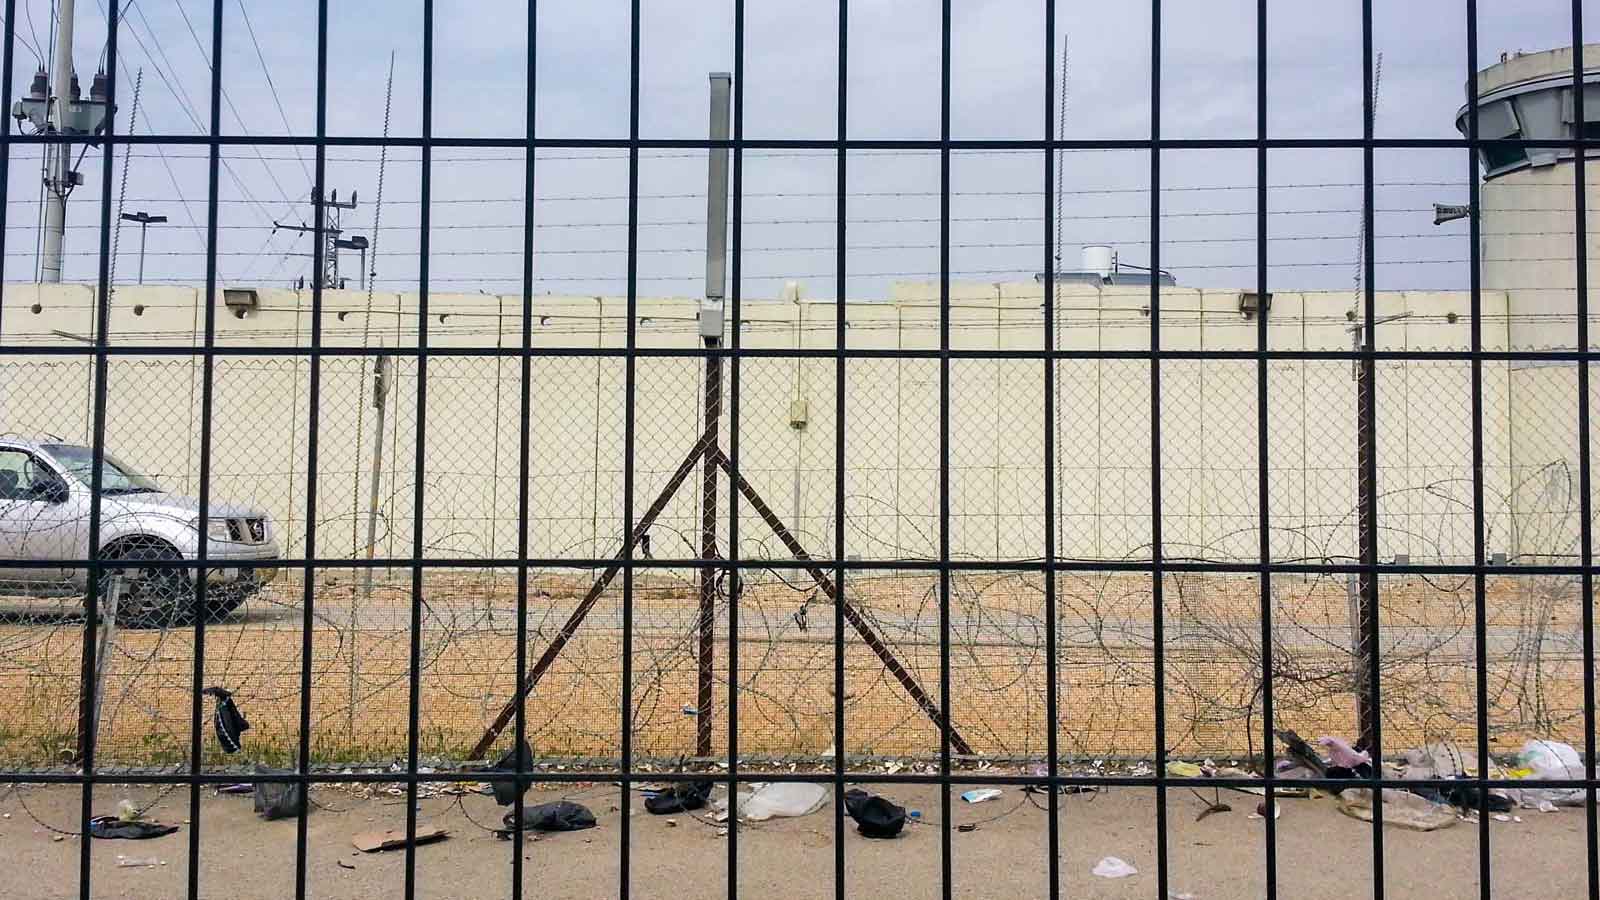 Separation wall and fence in Qalqilya. Credit: The Oakland Institute